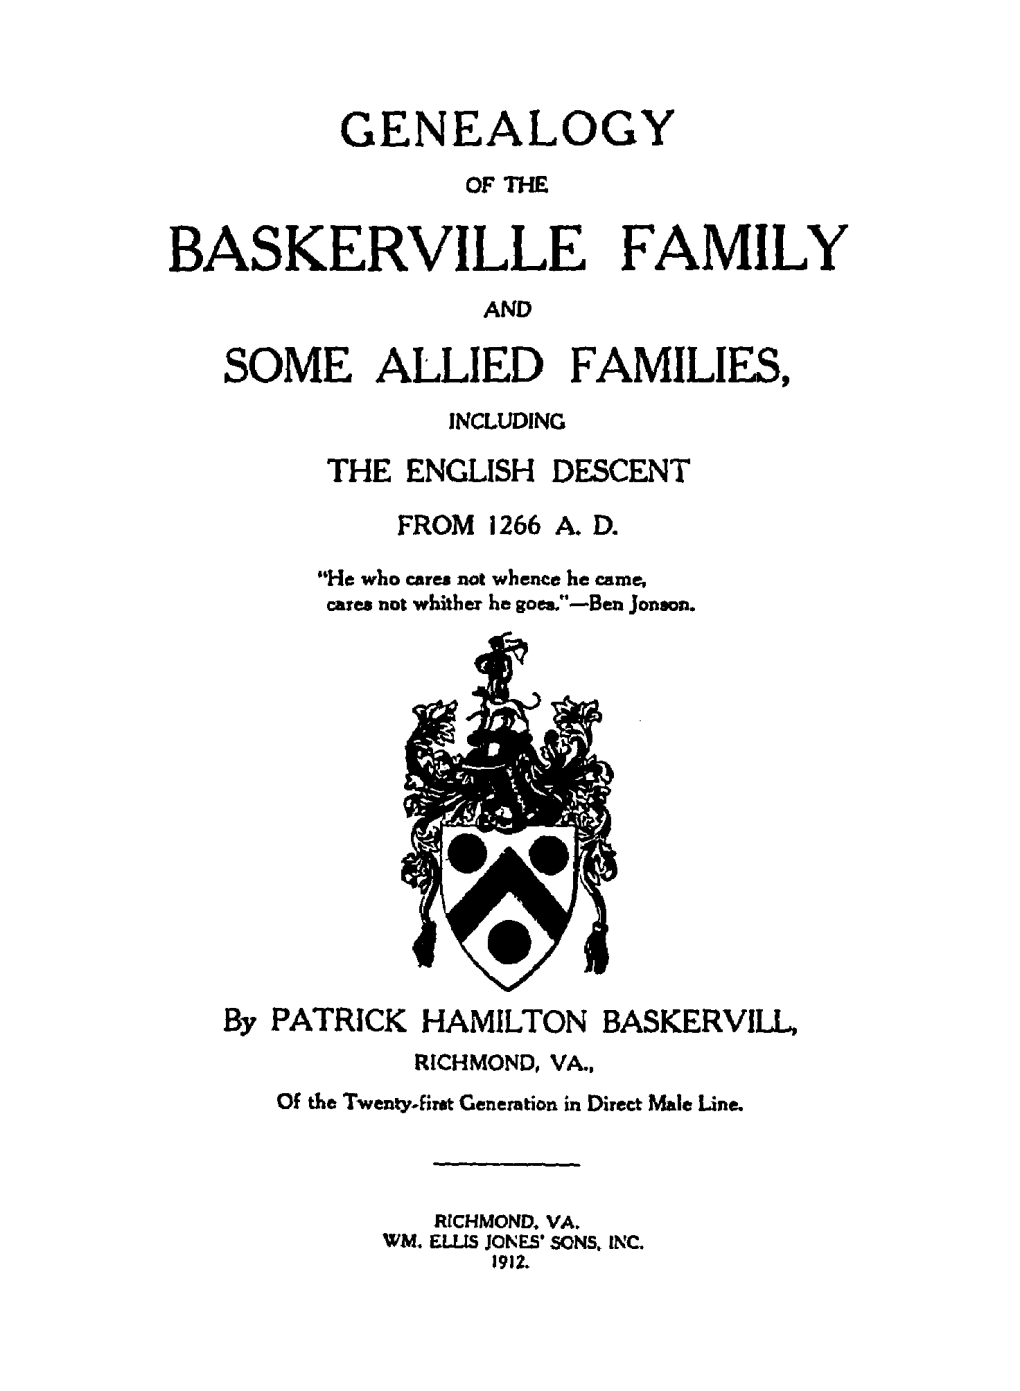 Baskerville Family and Some Allied Families, Including the English Descent from 1266 A